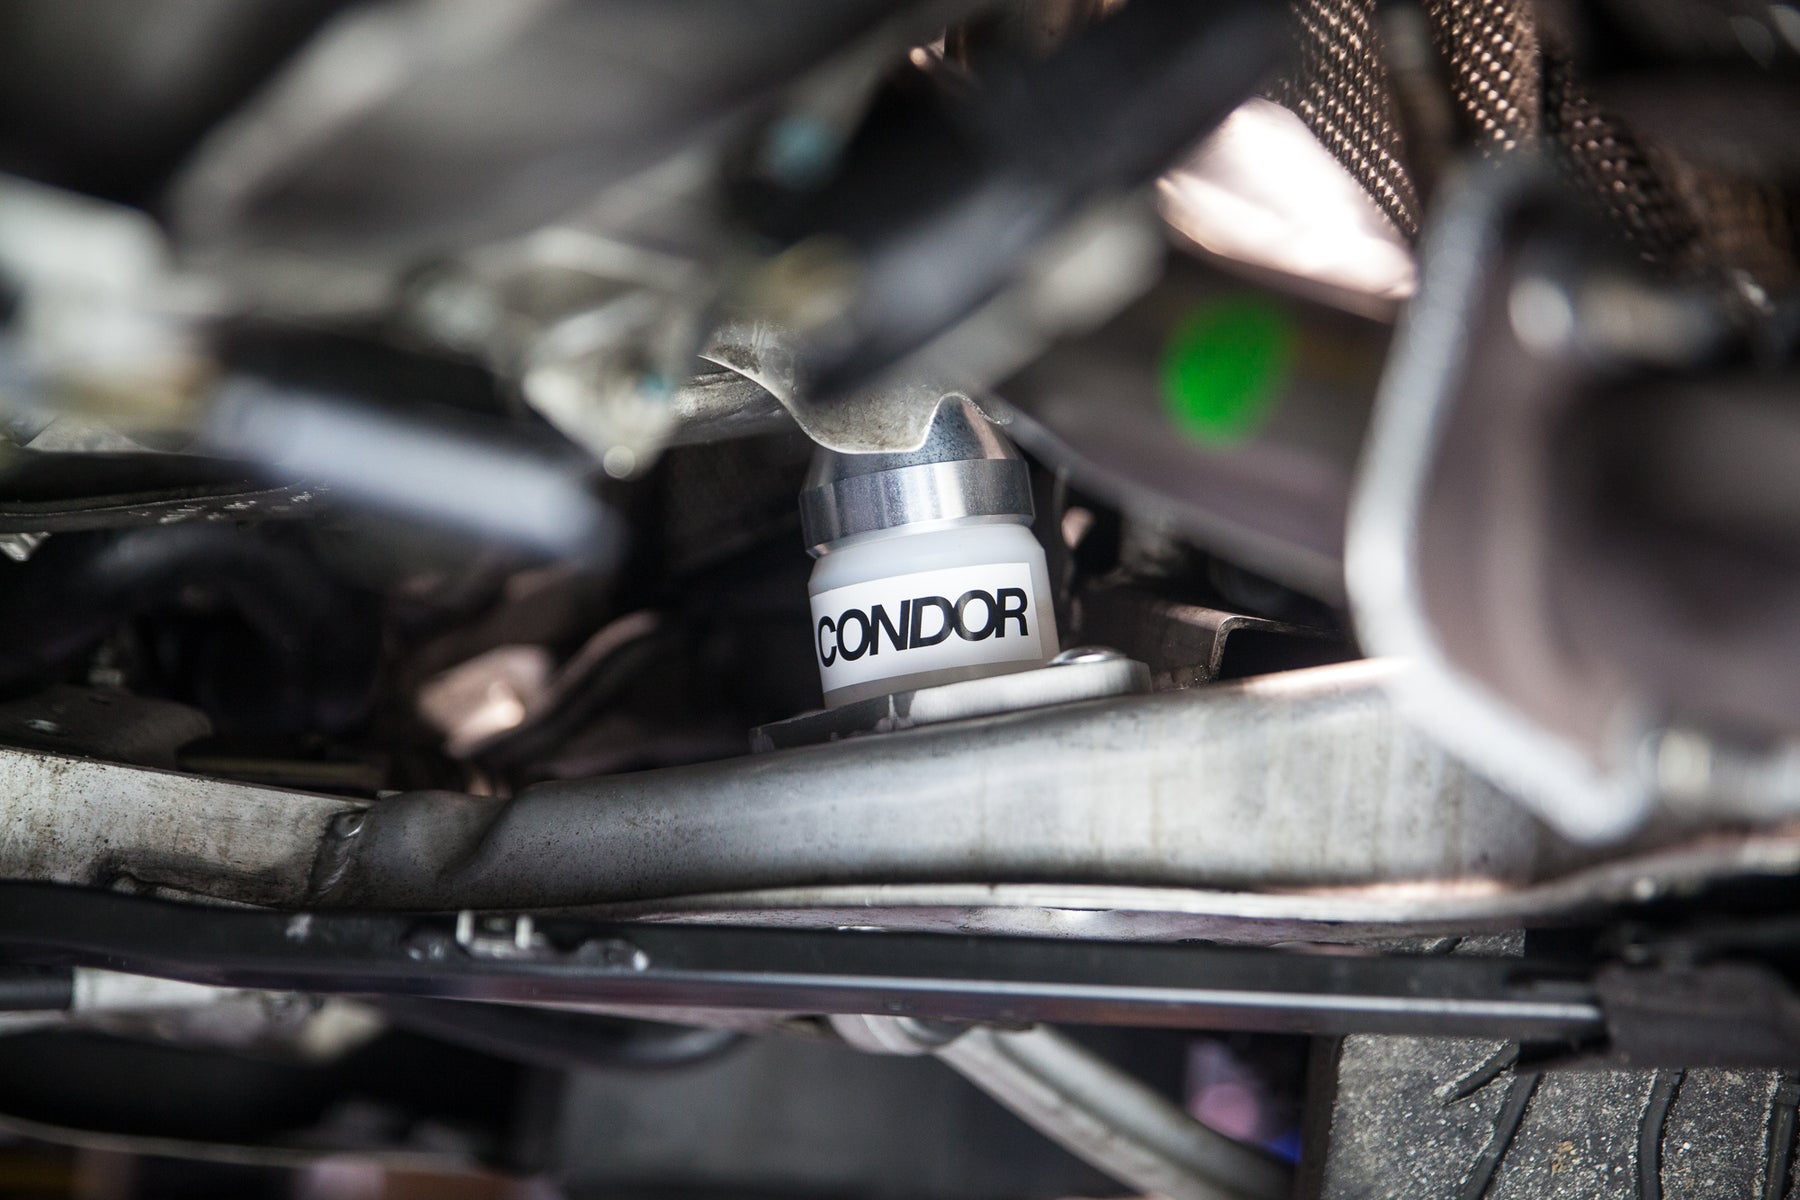 Solid Engine Mount & Suspension Bushing Questions